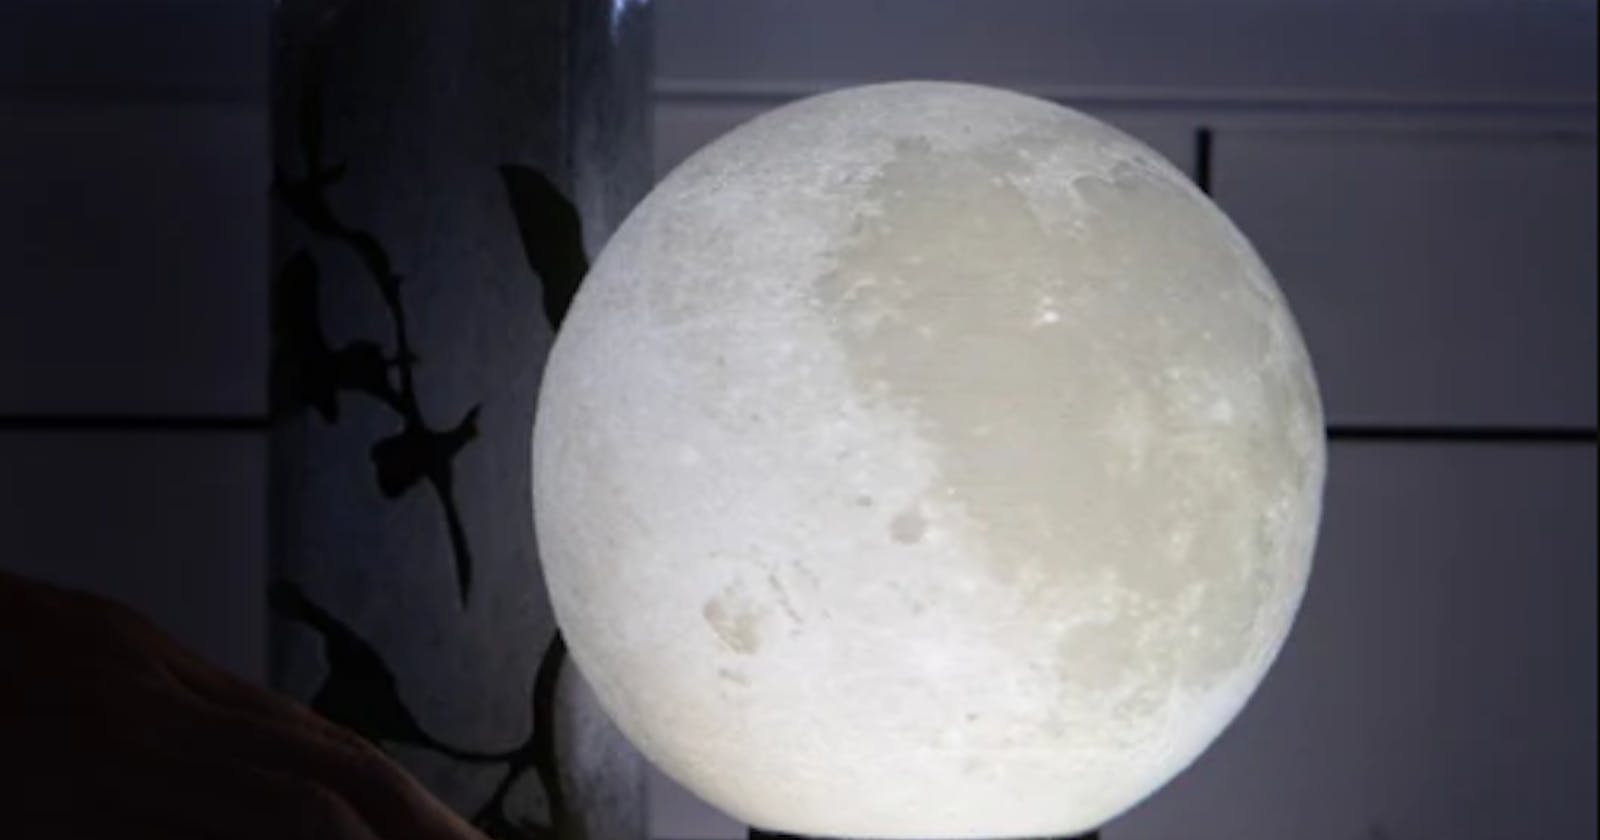 Lunar Love: Unique Moon Table Lamp Designs for a Stylish Home